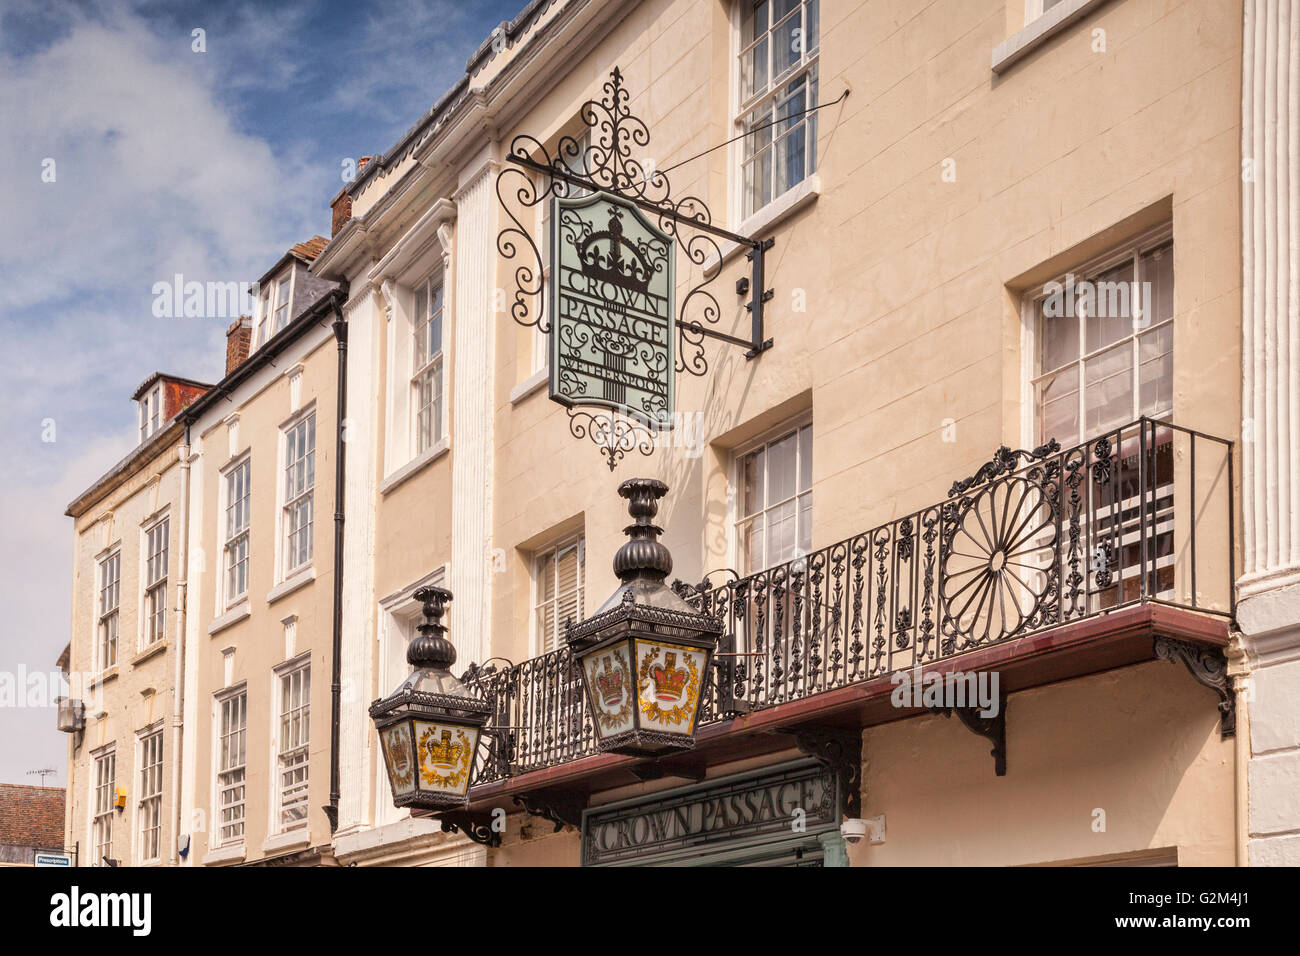 The Crown Passage, a Wetherspoon Hotel which has been known as a coaching inn since the 16th century, Worcester, Worcestershire, Stock Photo